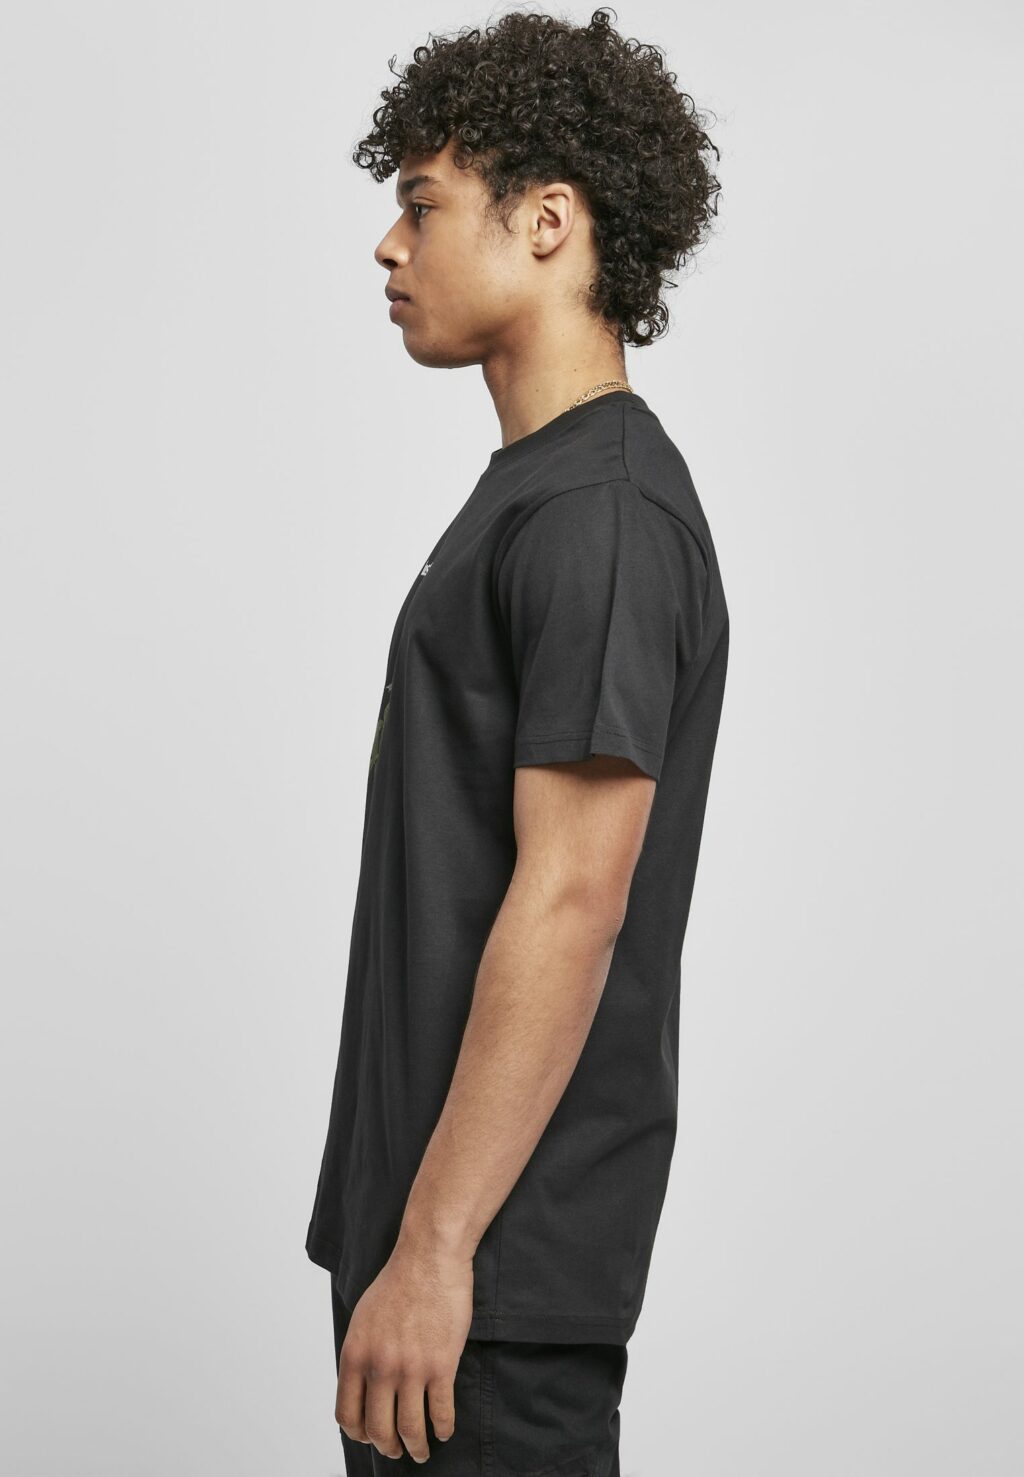 Lost Youth Rose Tee black MT1582